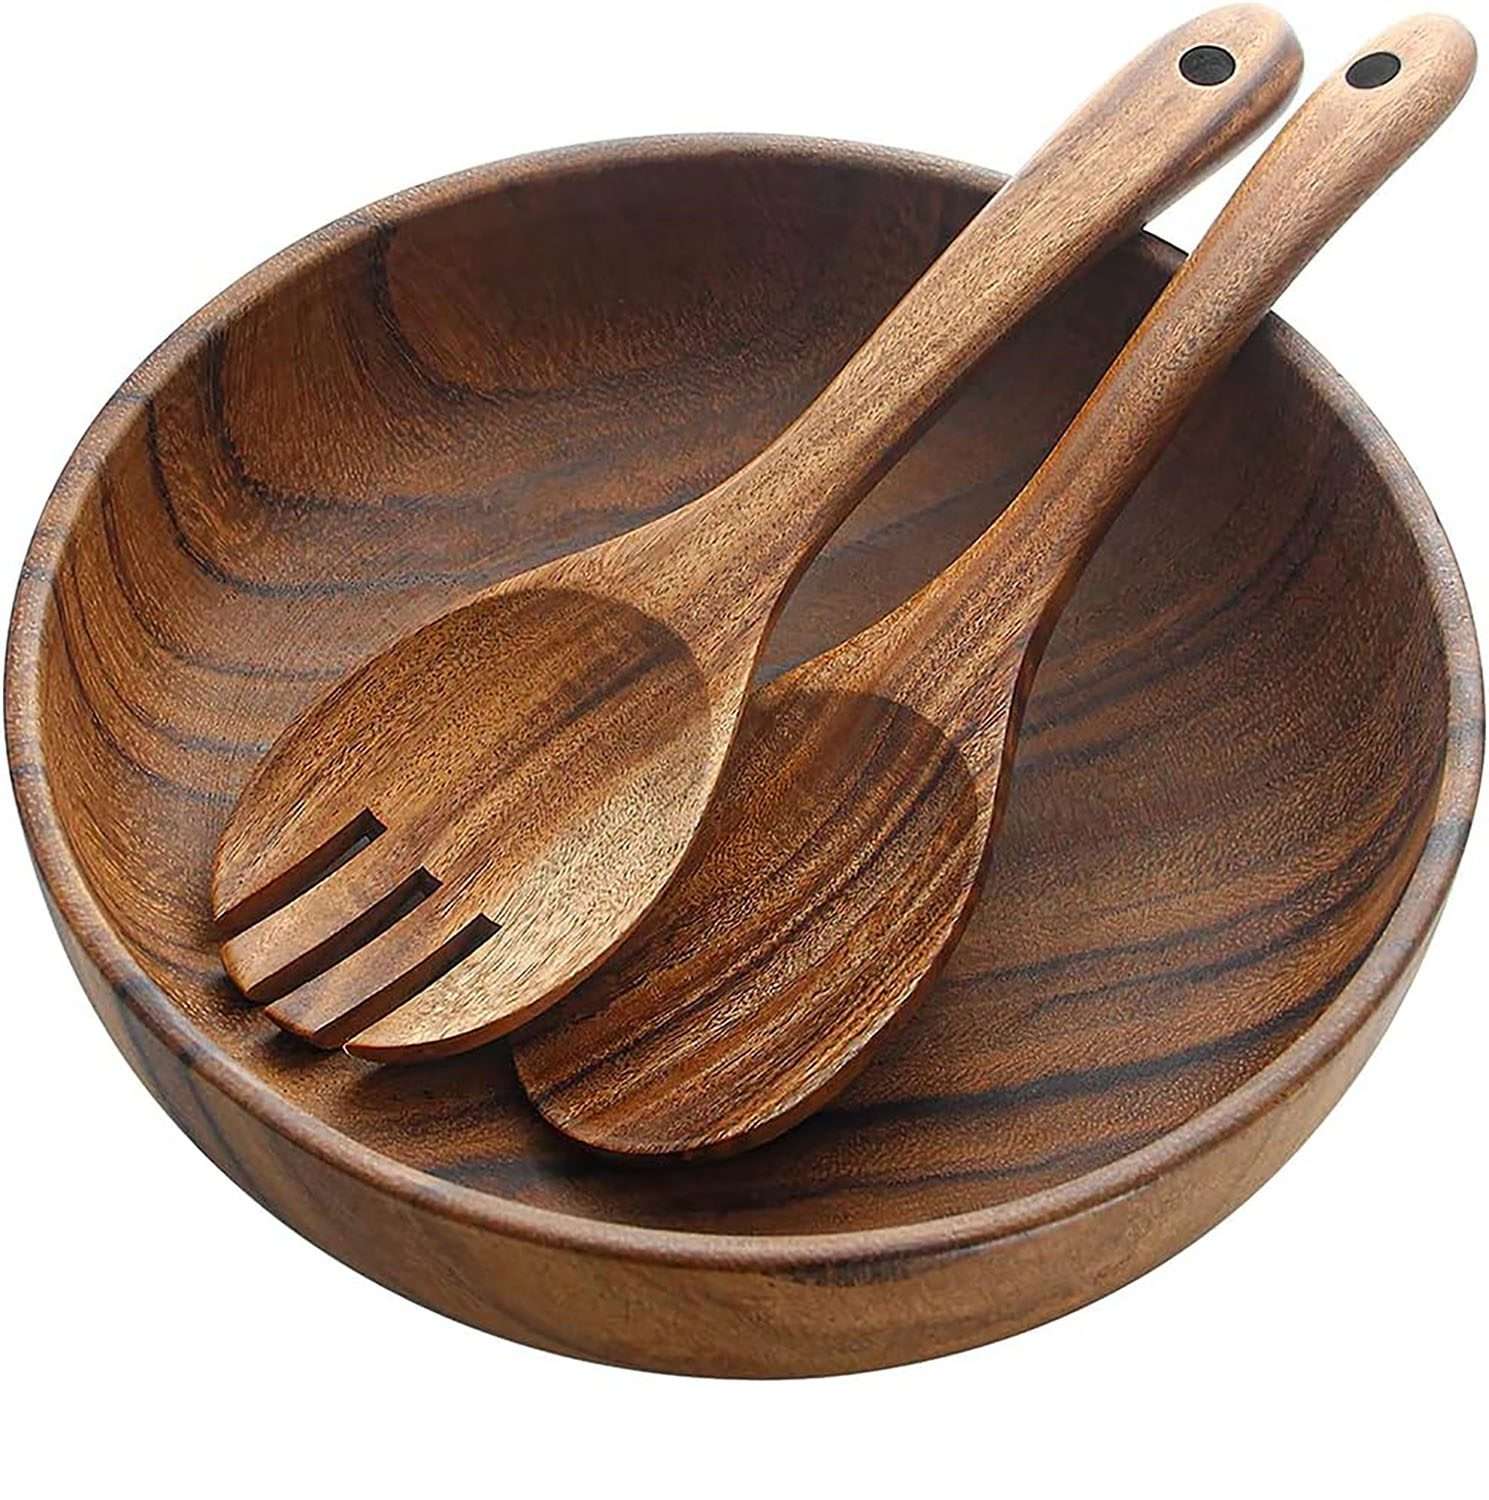 Handcrafted Wooden Salad Bowls| Large Acacia Wood Salad Serving Bowl with Serving Tongs